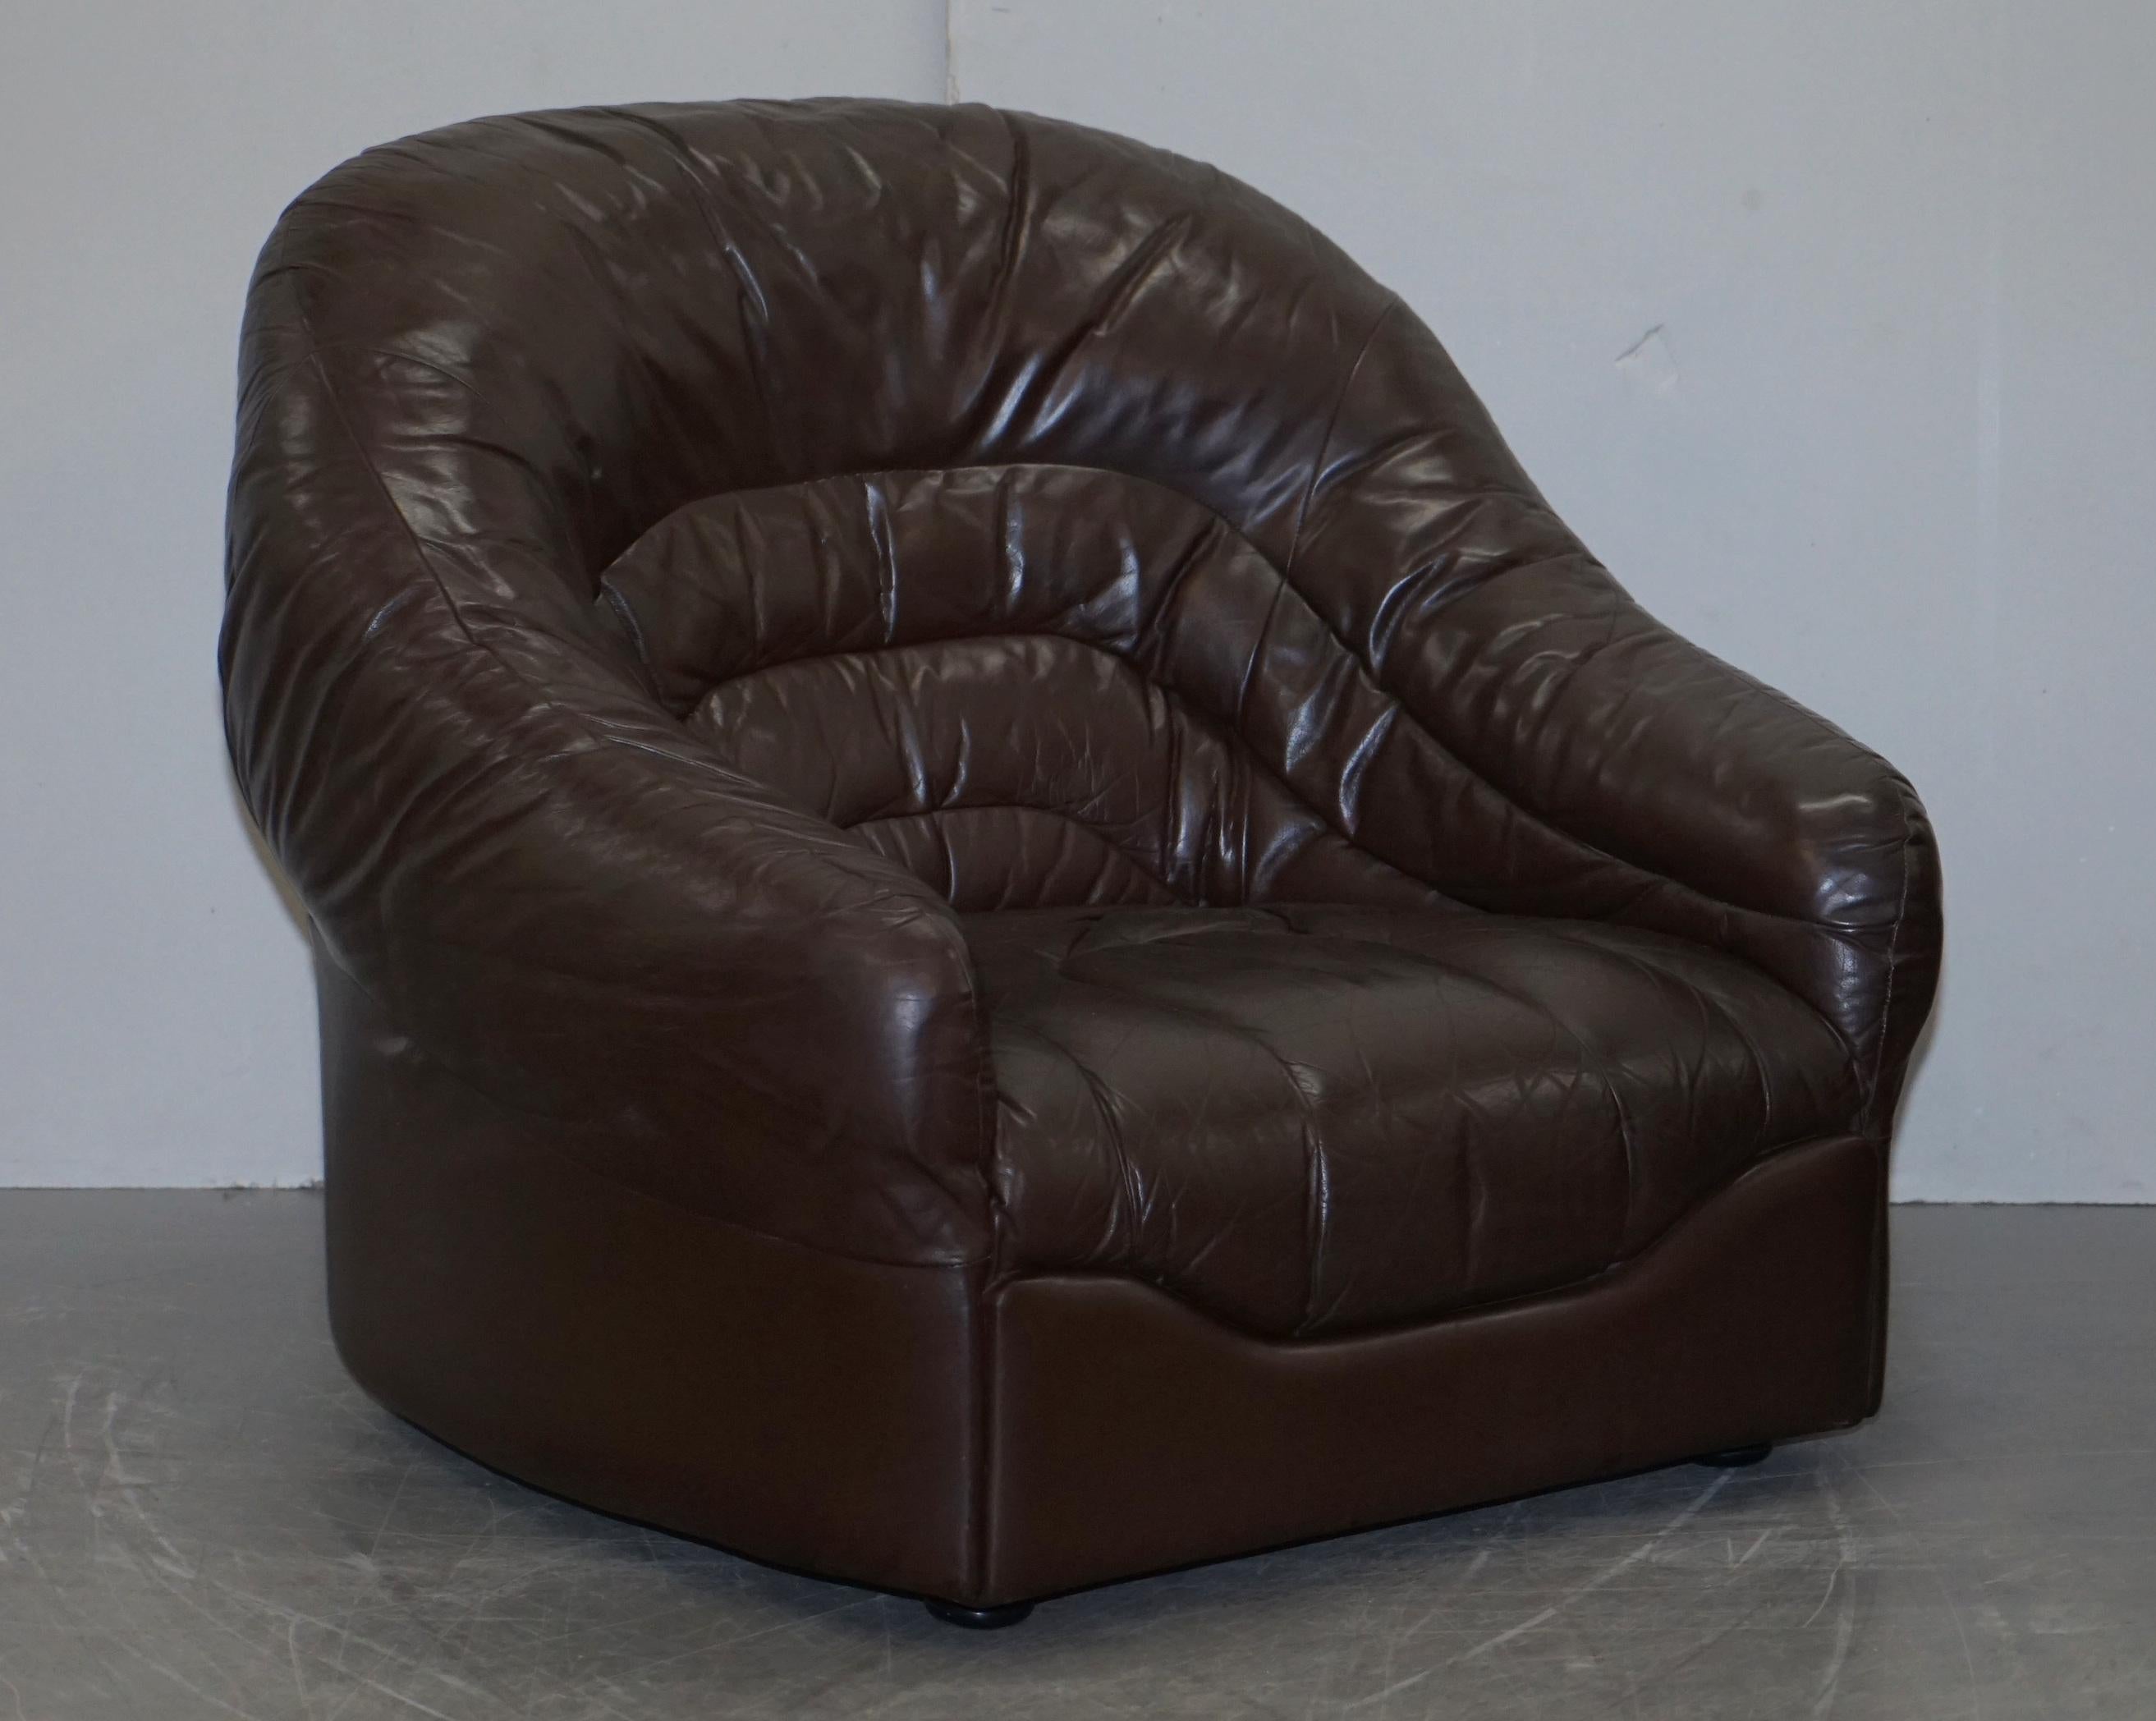 Hand-Crafted Vintage Mid-Century Modern Danish Style Brown Leather Sofa & Armchair Suite